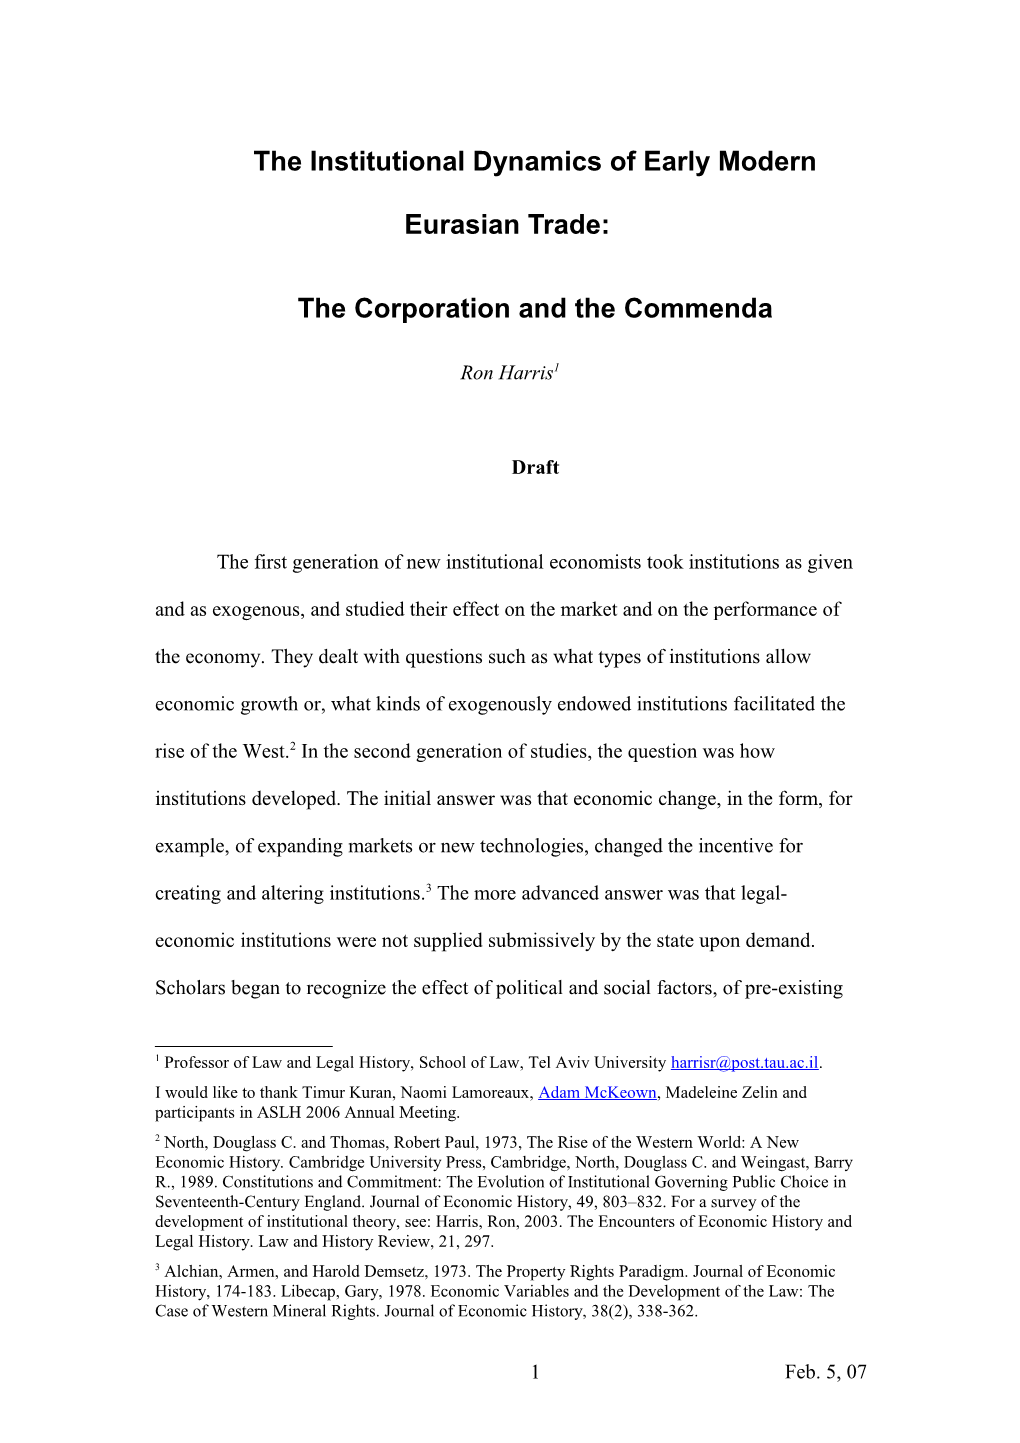 The Institutional Dynamics of Early Modern Eurasian Trade: the Corporation and the Commenda